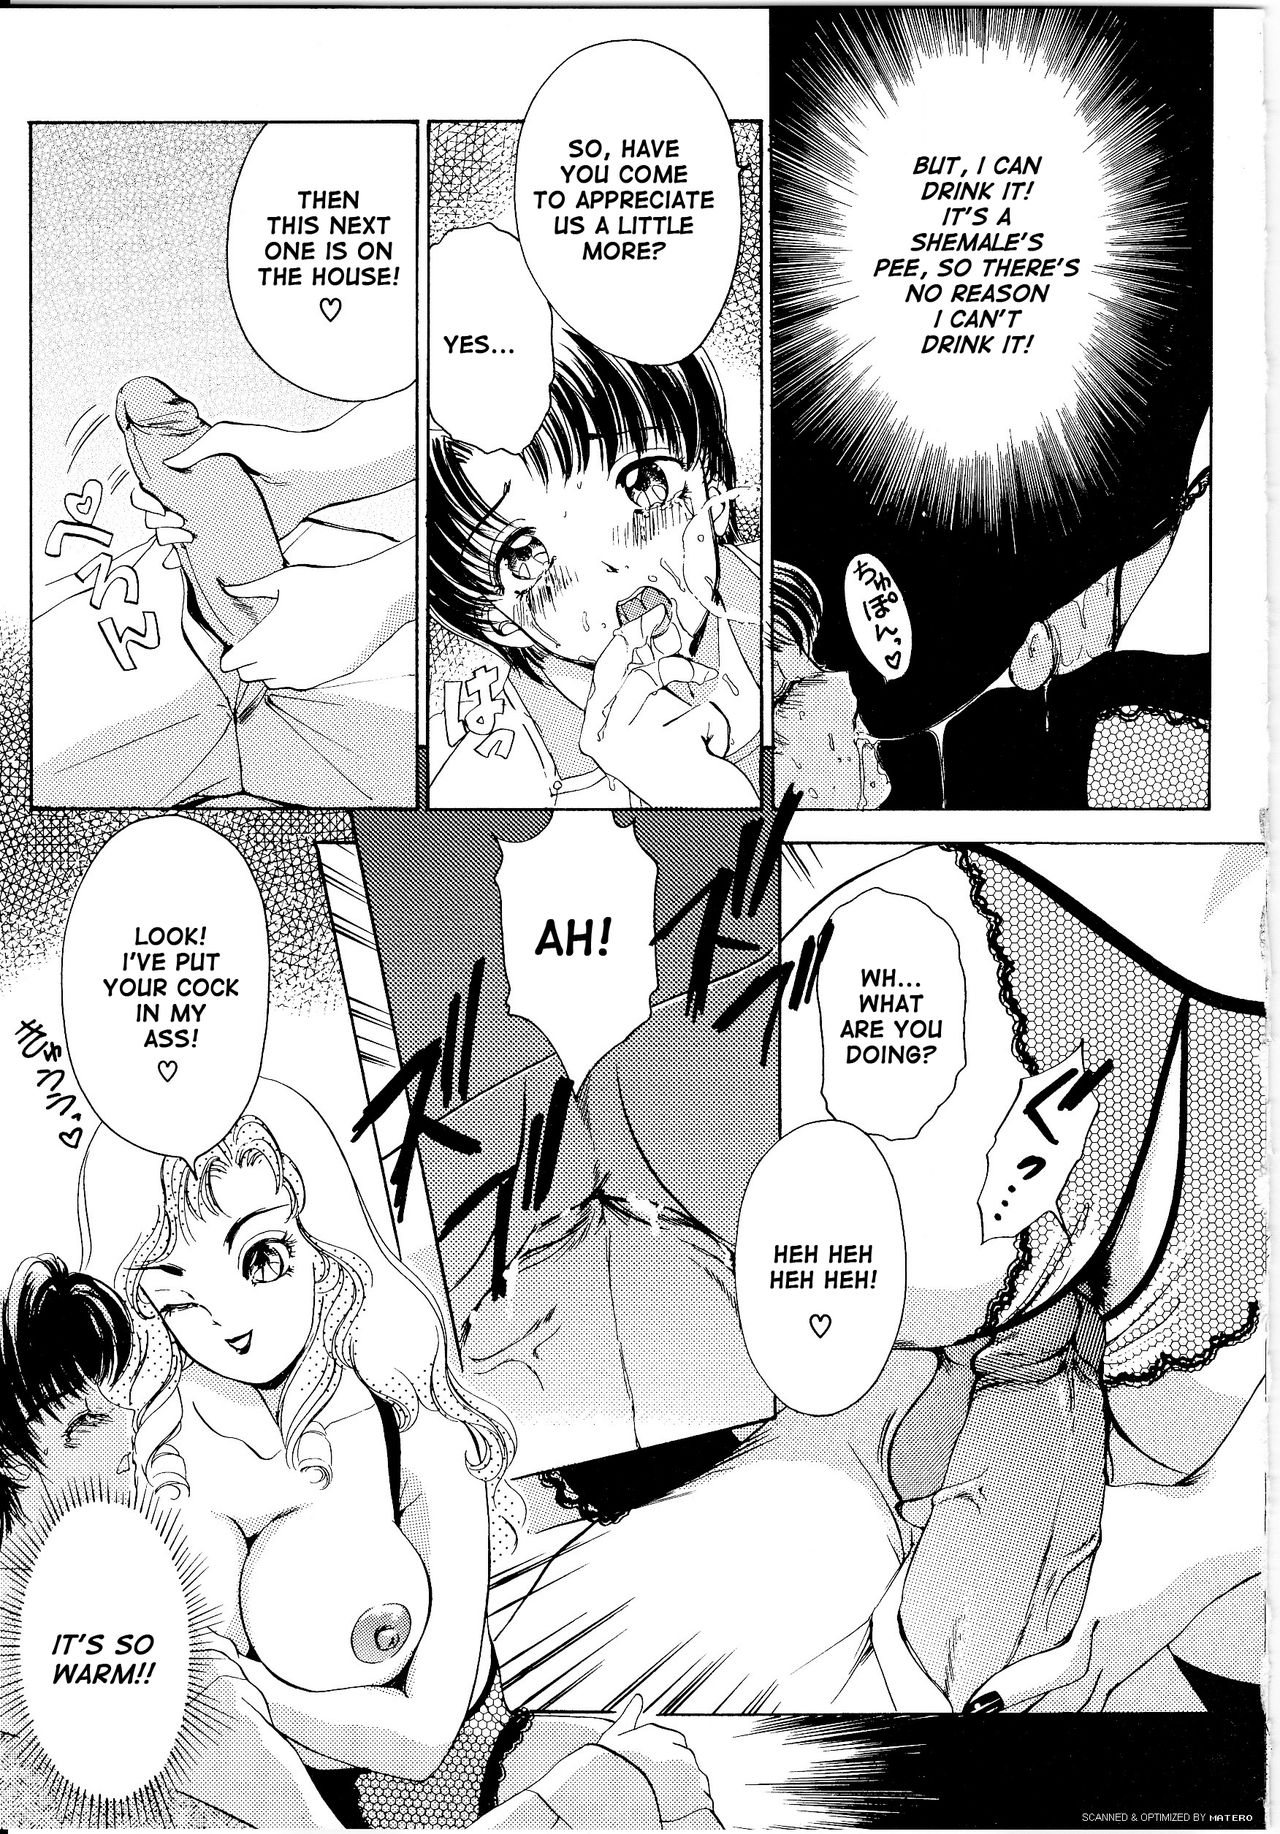 [The Amanoja9] T.S. I LOVE YOU... 1 Chapter 13 [English] page 7 full